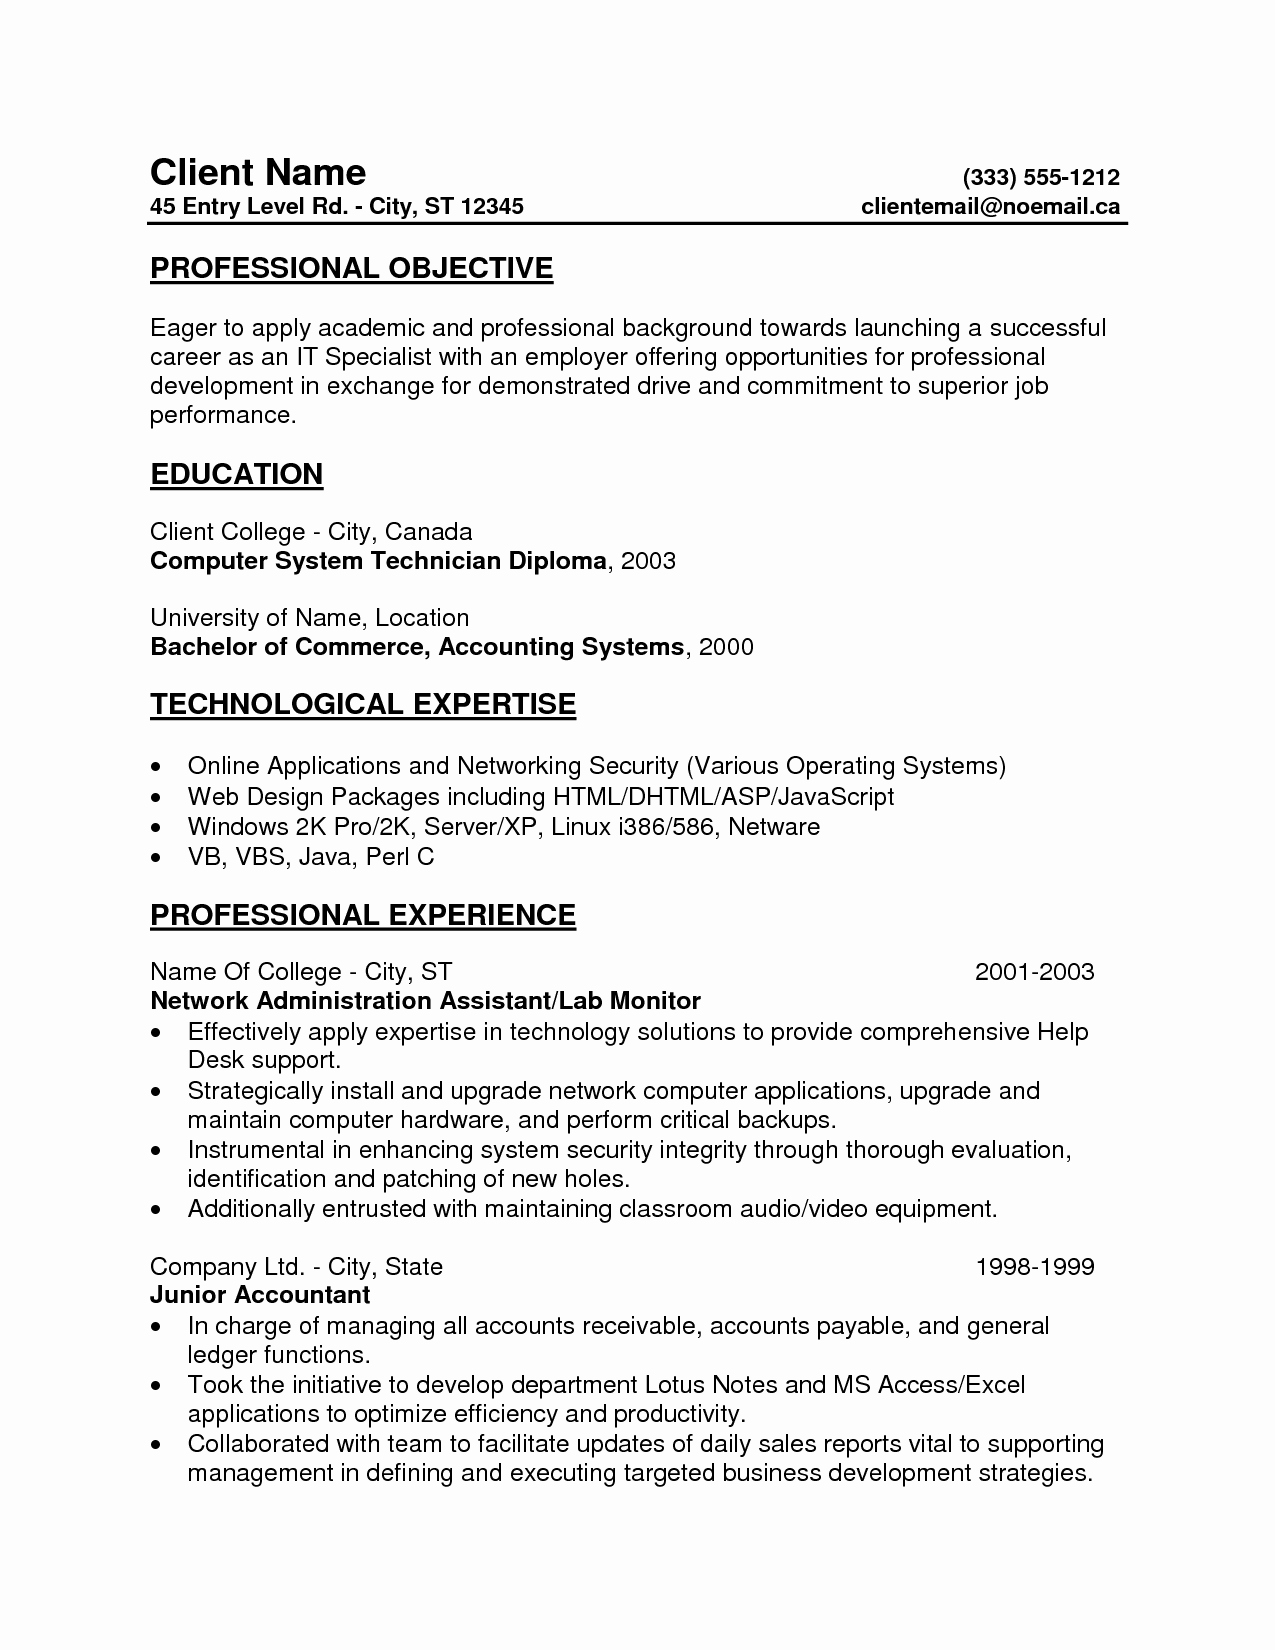 Entry Level Resume Professional Objective and Professional